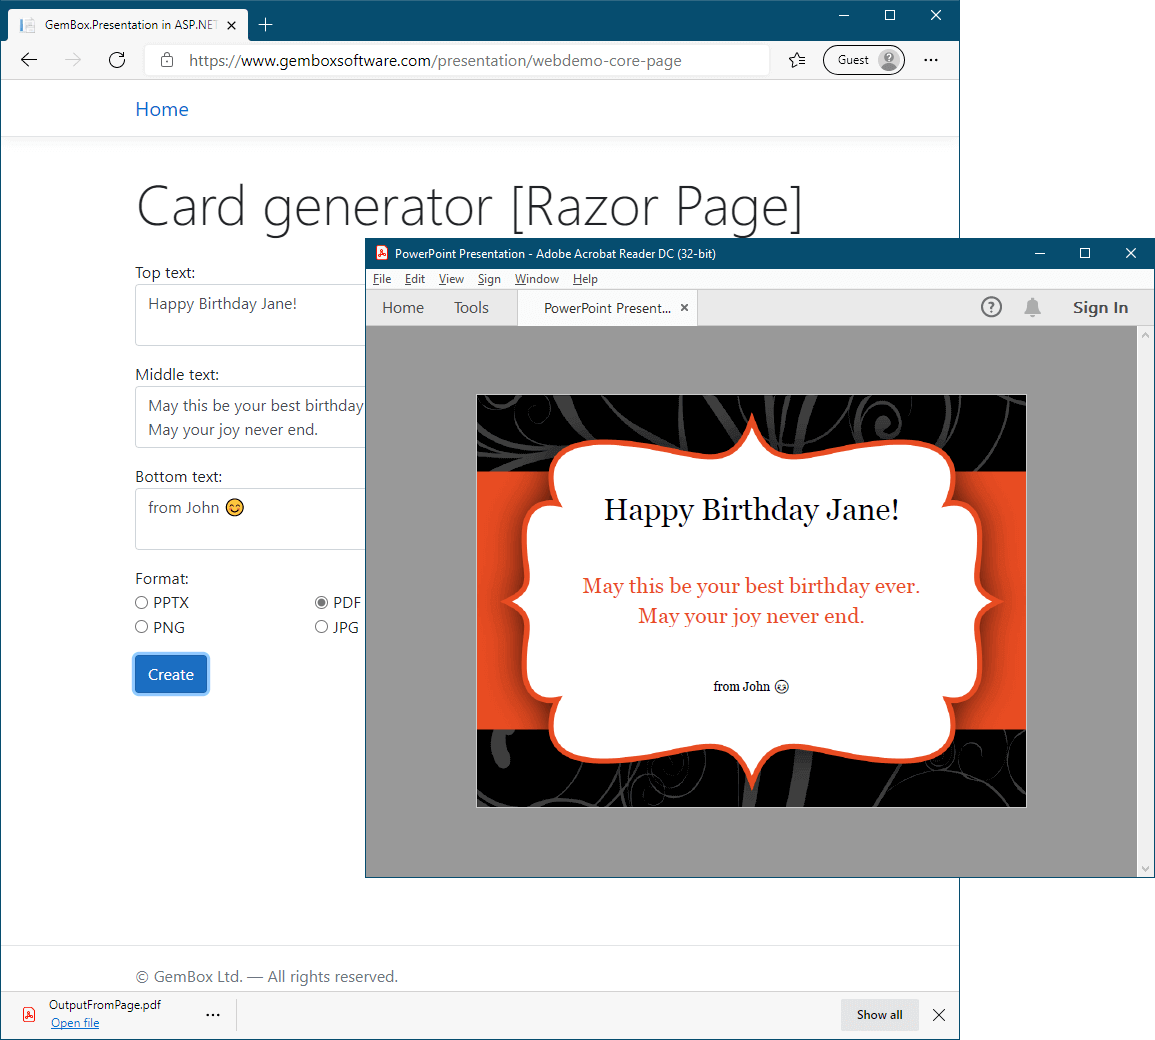 Sending data from Razor page and generating PDF file in ASP.NET Core Razor Pages application